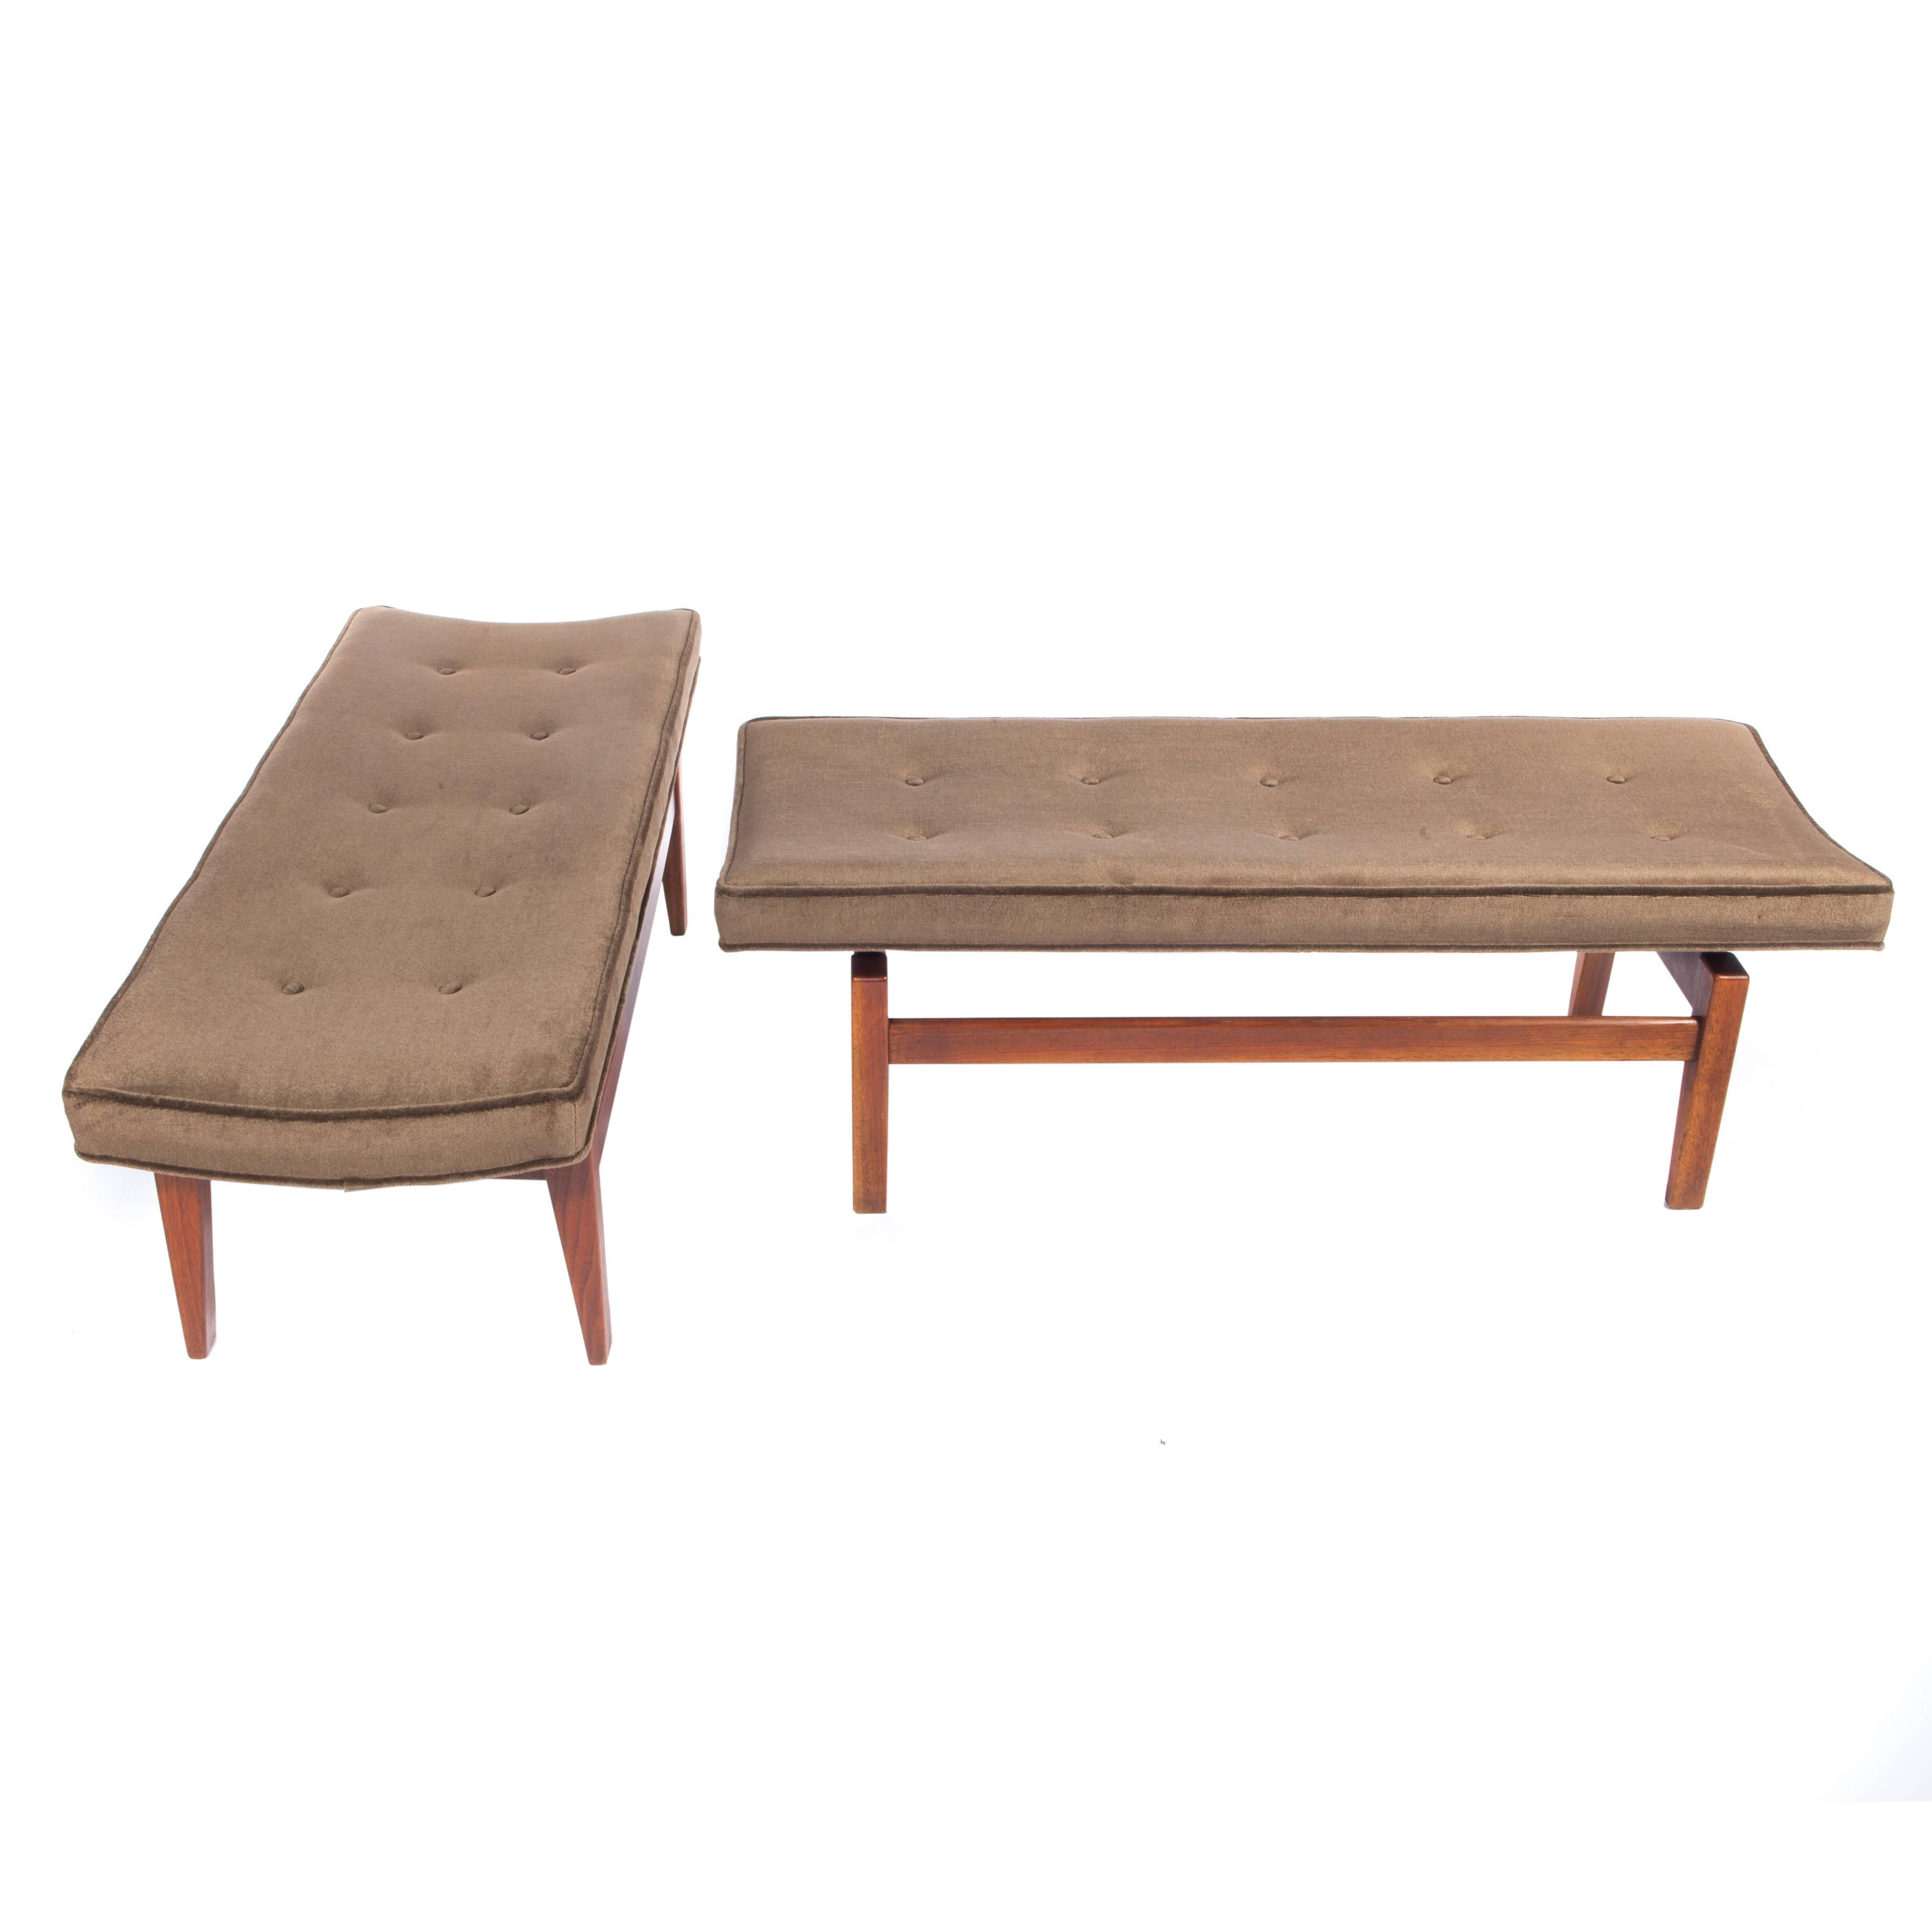 Pair of sturdy and stylish benches featuring four legs supporting a cantilevered, gently curved, button-tufted seat, circa 1960s. The walnut retains its original warm brown finish and the seats are newly reupholstered in medium-chocolate-brown